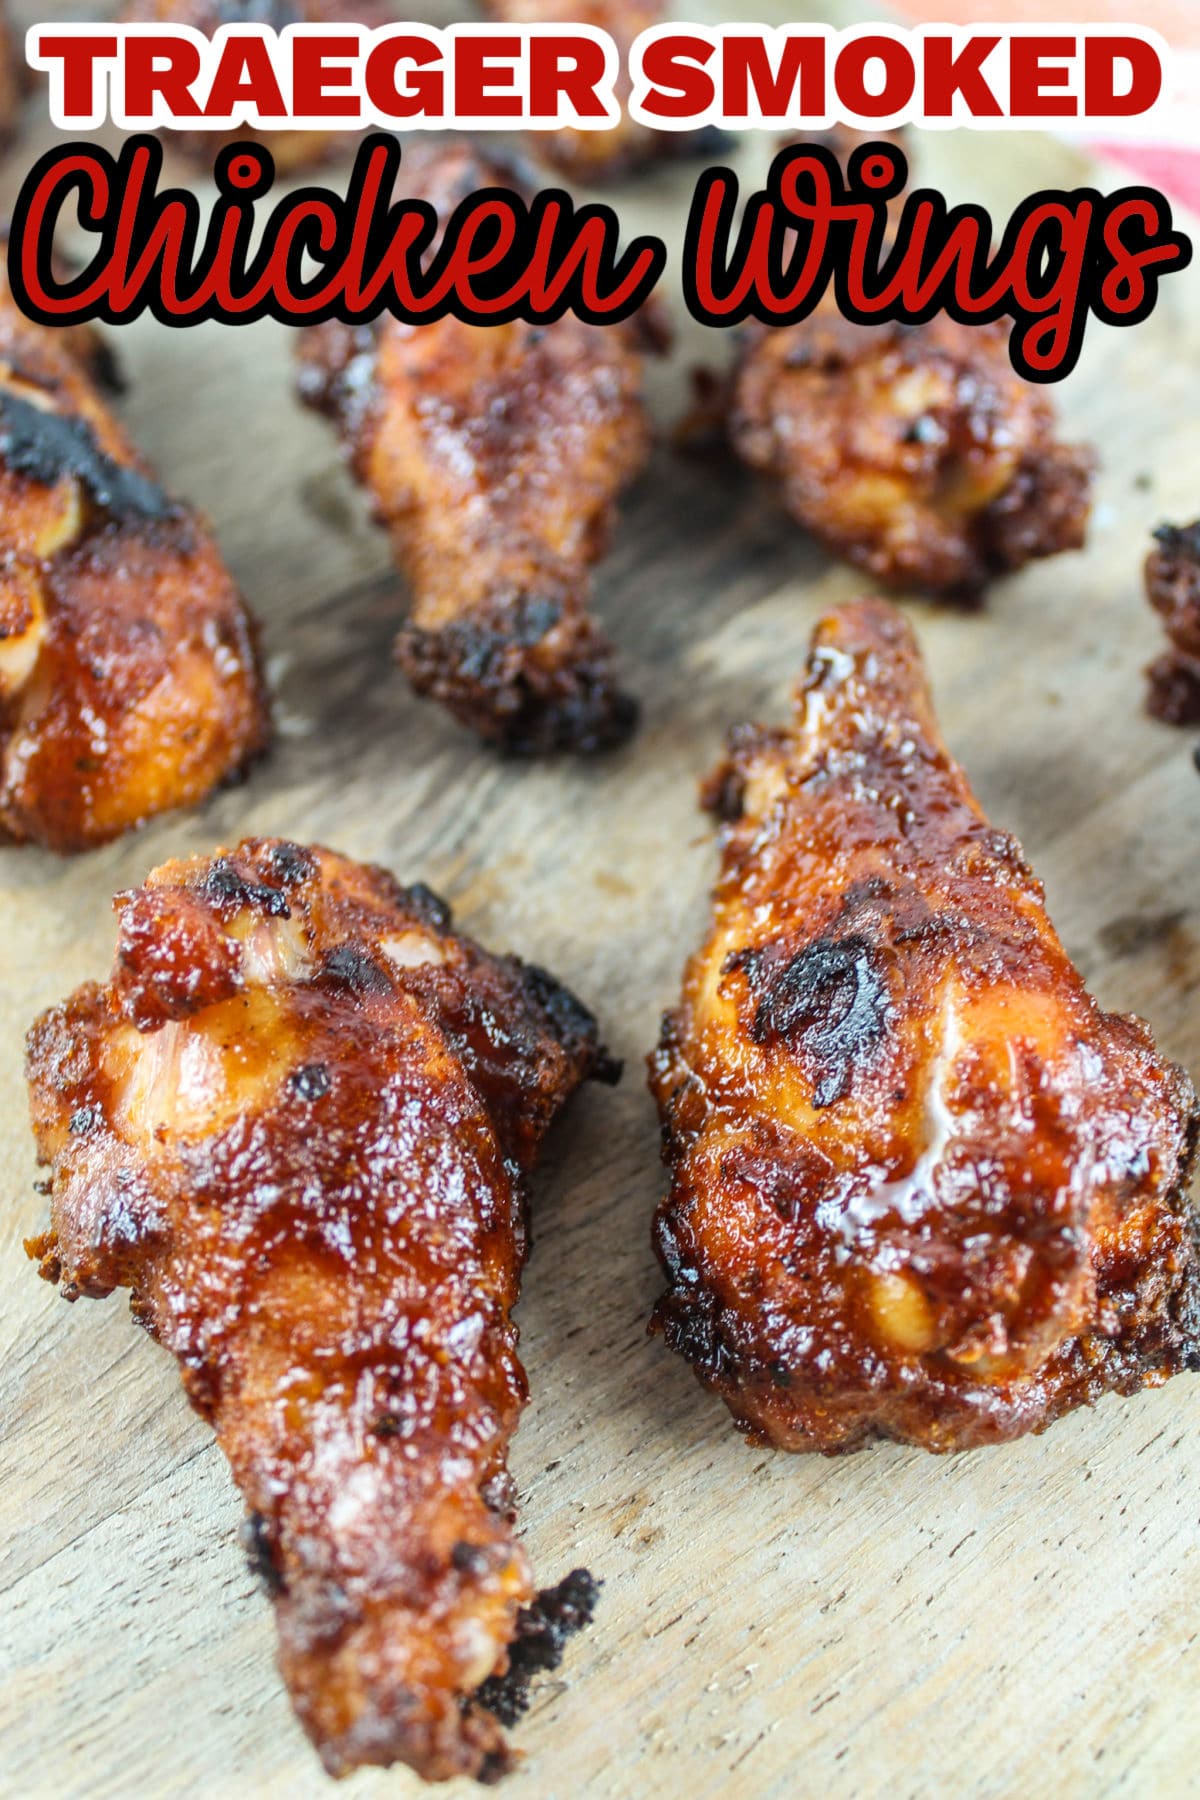 Smoked wings are one of my favorite appetizers that I've discovered since getting my Traeger pellet grill. The smoky flavor from the wood pellets soaks into the wings and gives them an amazing aroma and taste.  via @foodhussy